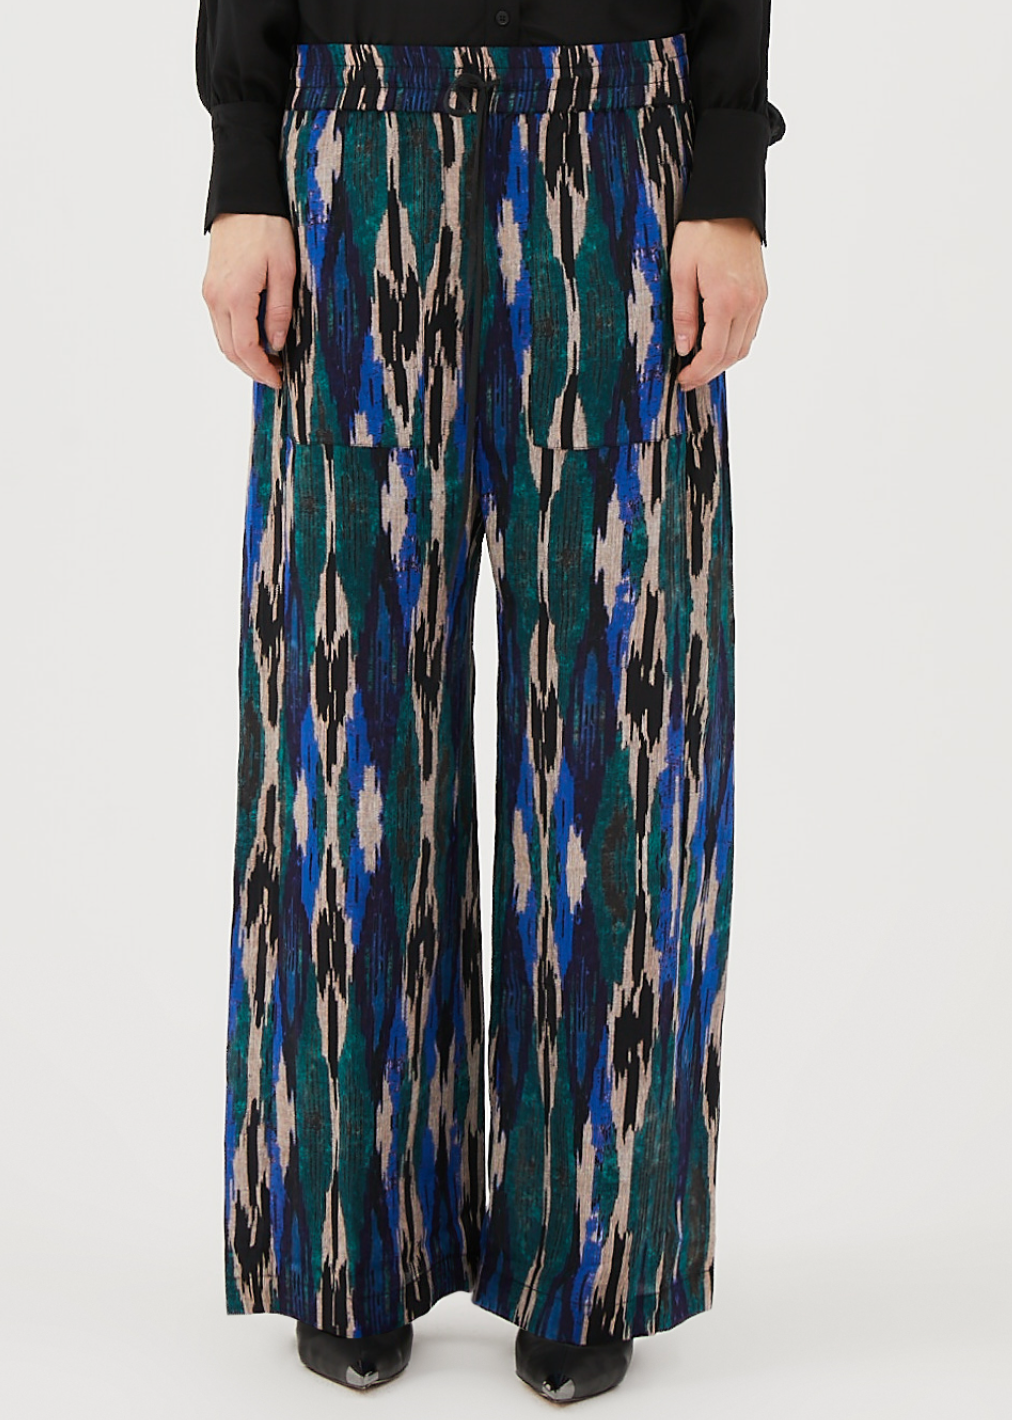 The Noia Emilia pant feature a groovy pattern that can easily be paired with a nice blouse or a comfortable t-shirt. They feature an elastic waistband and a clean hem.  Fits true to size.